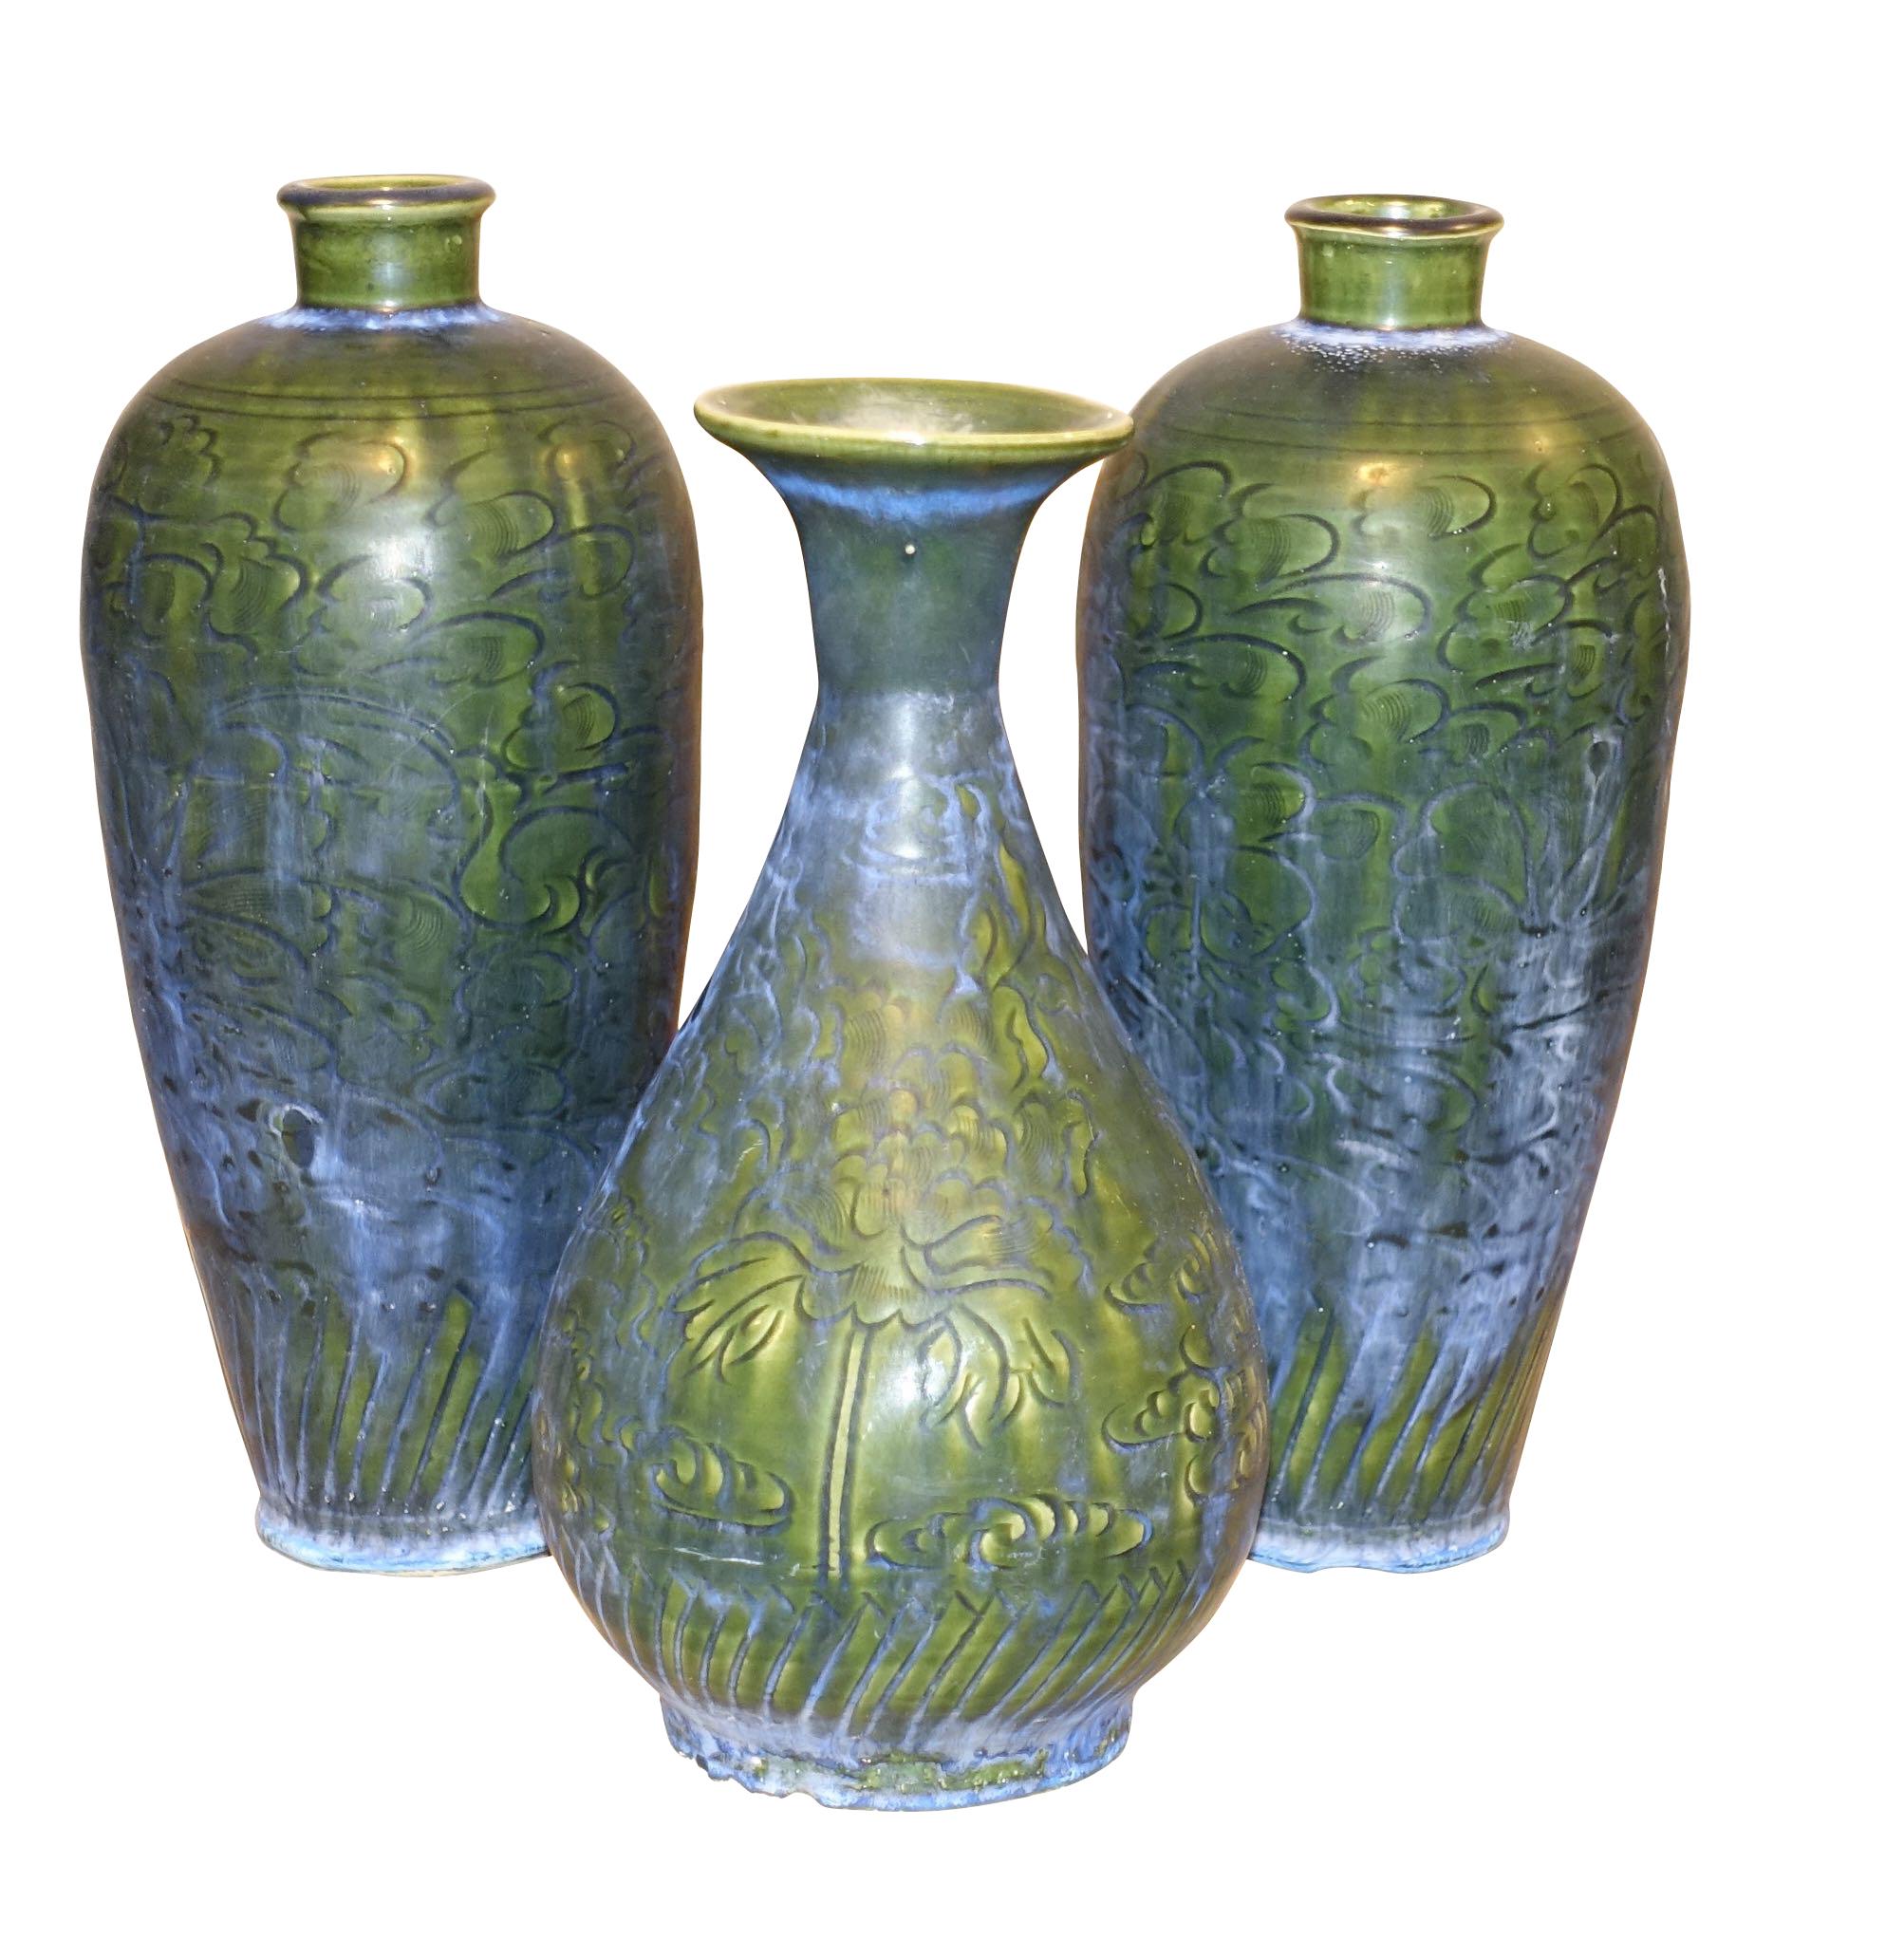 Contemporary Chinese dark blue and green glazed vase with engraved decorative detail.
Classic shape
Sits nicely with S5072.
     